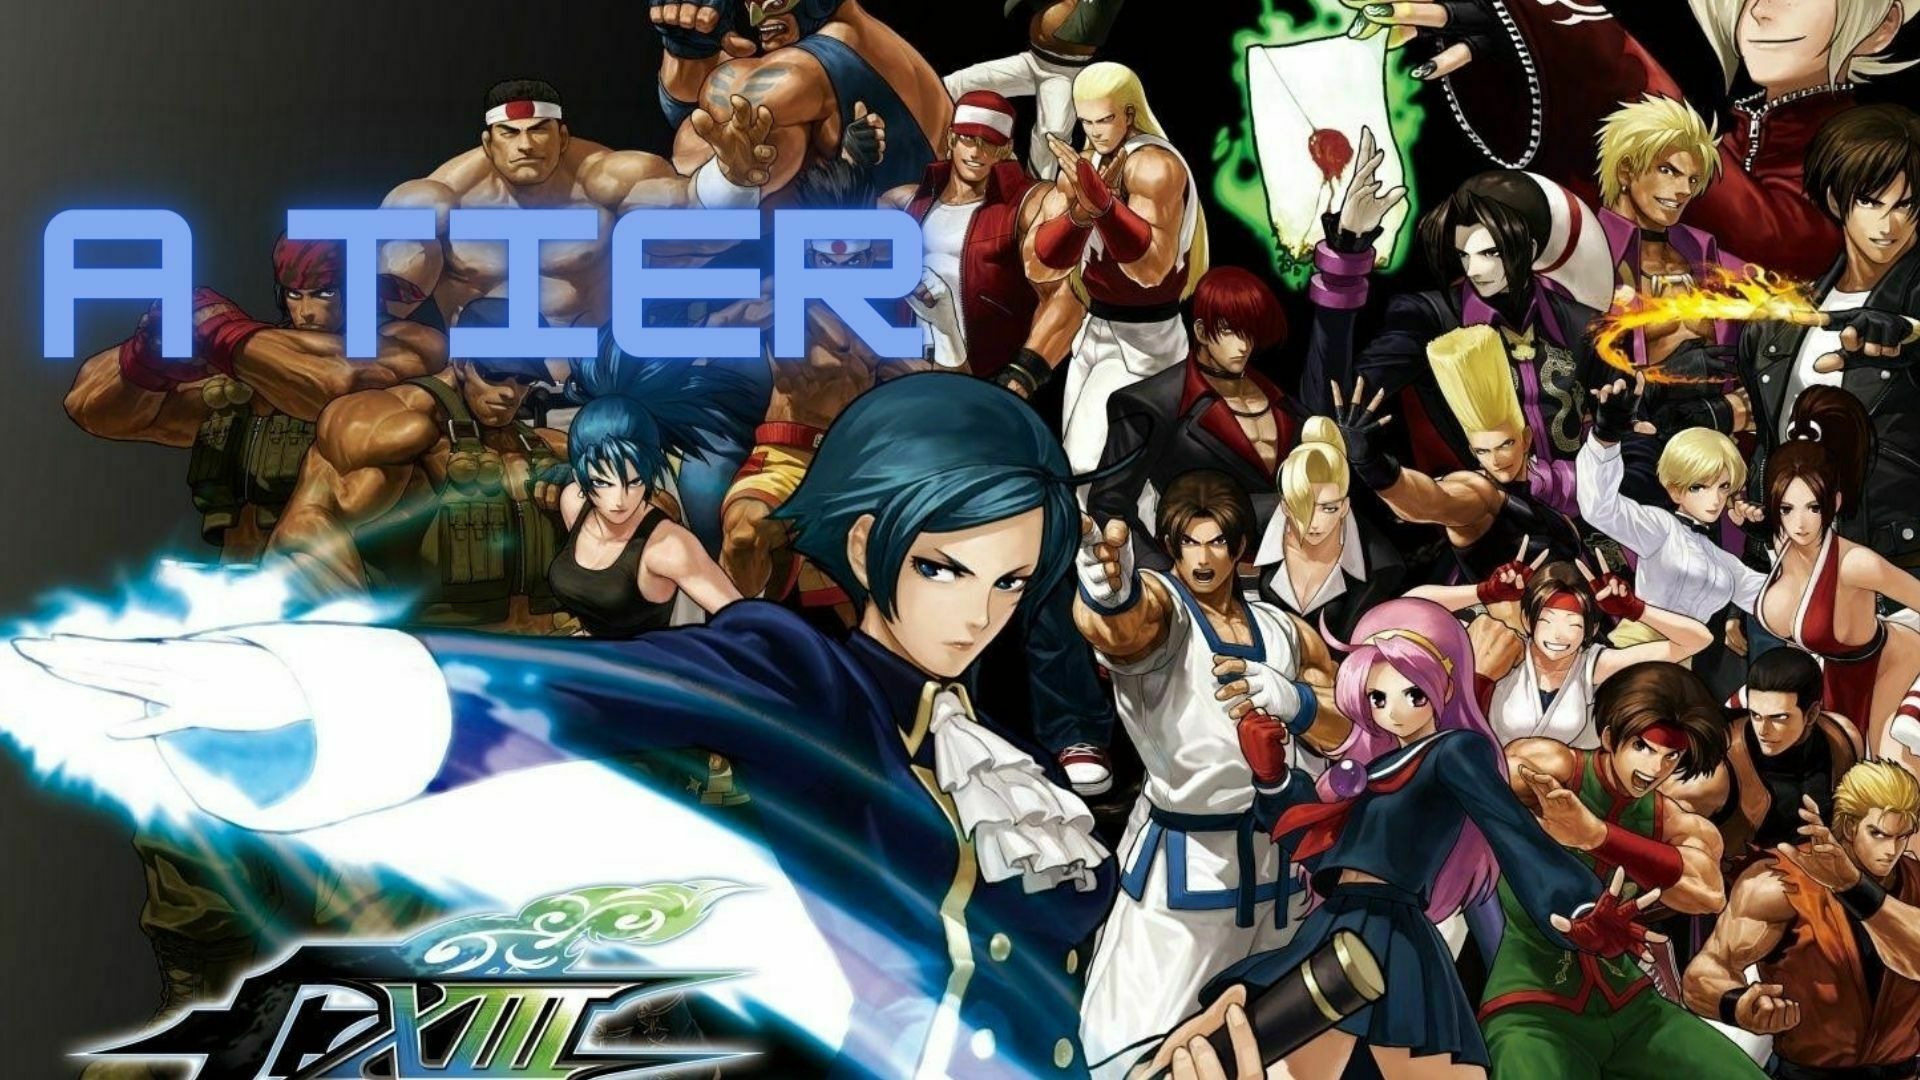 List of some average KOF13 characters